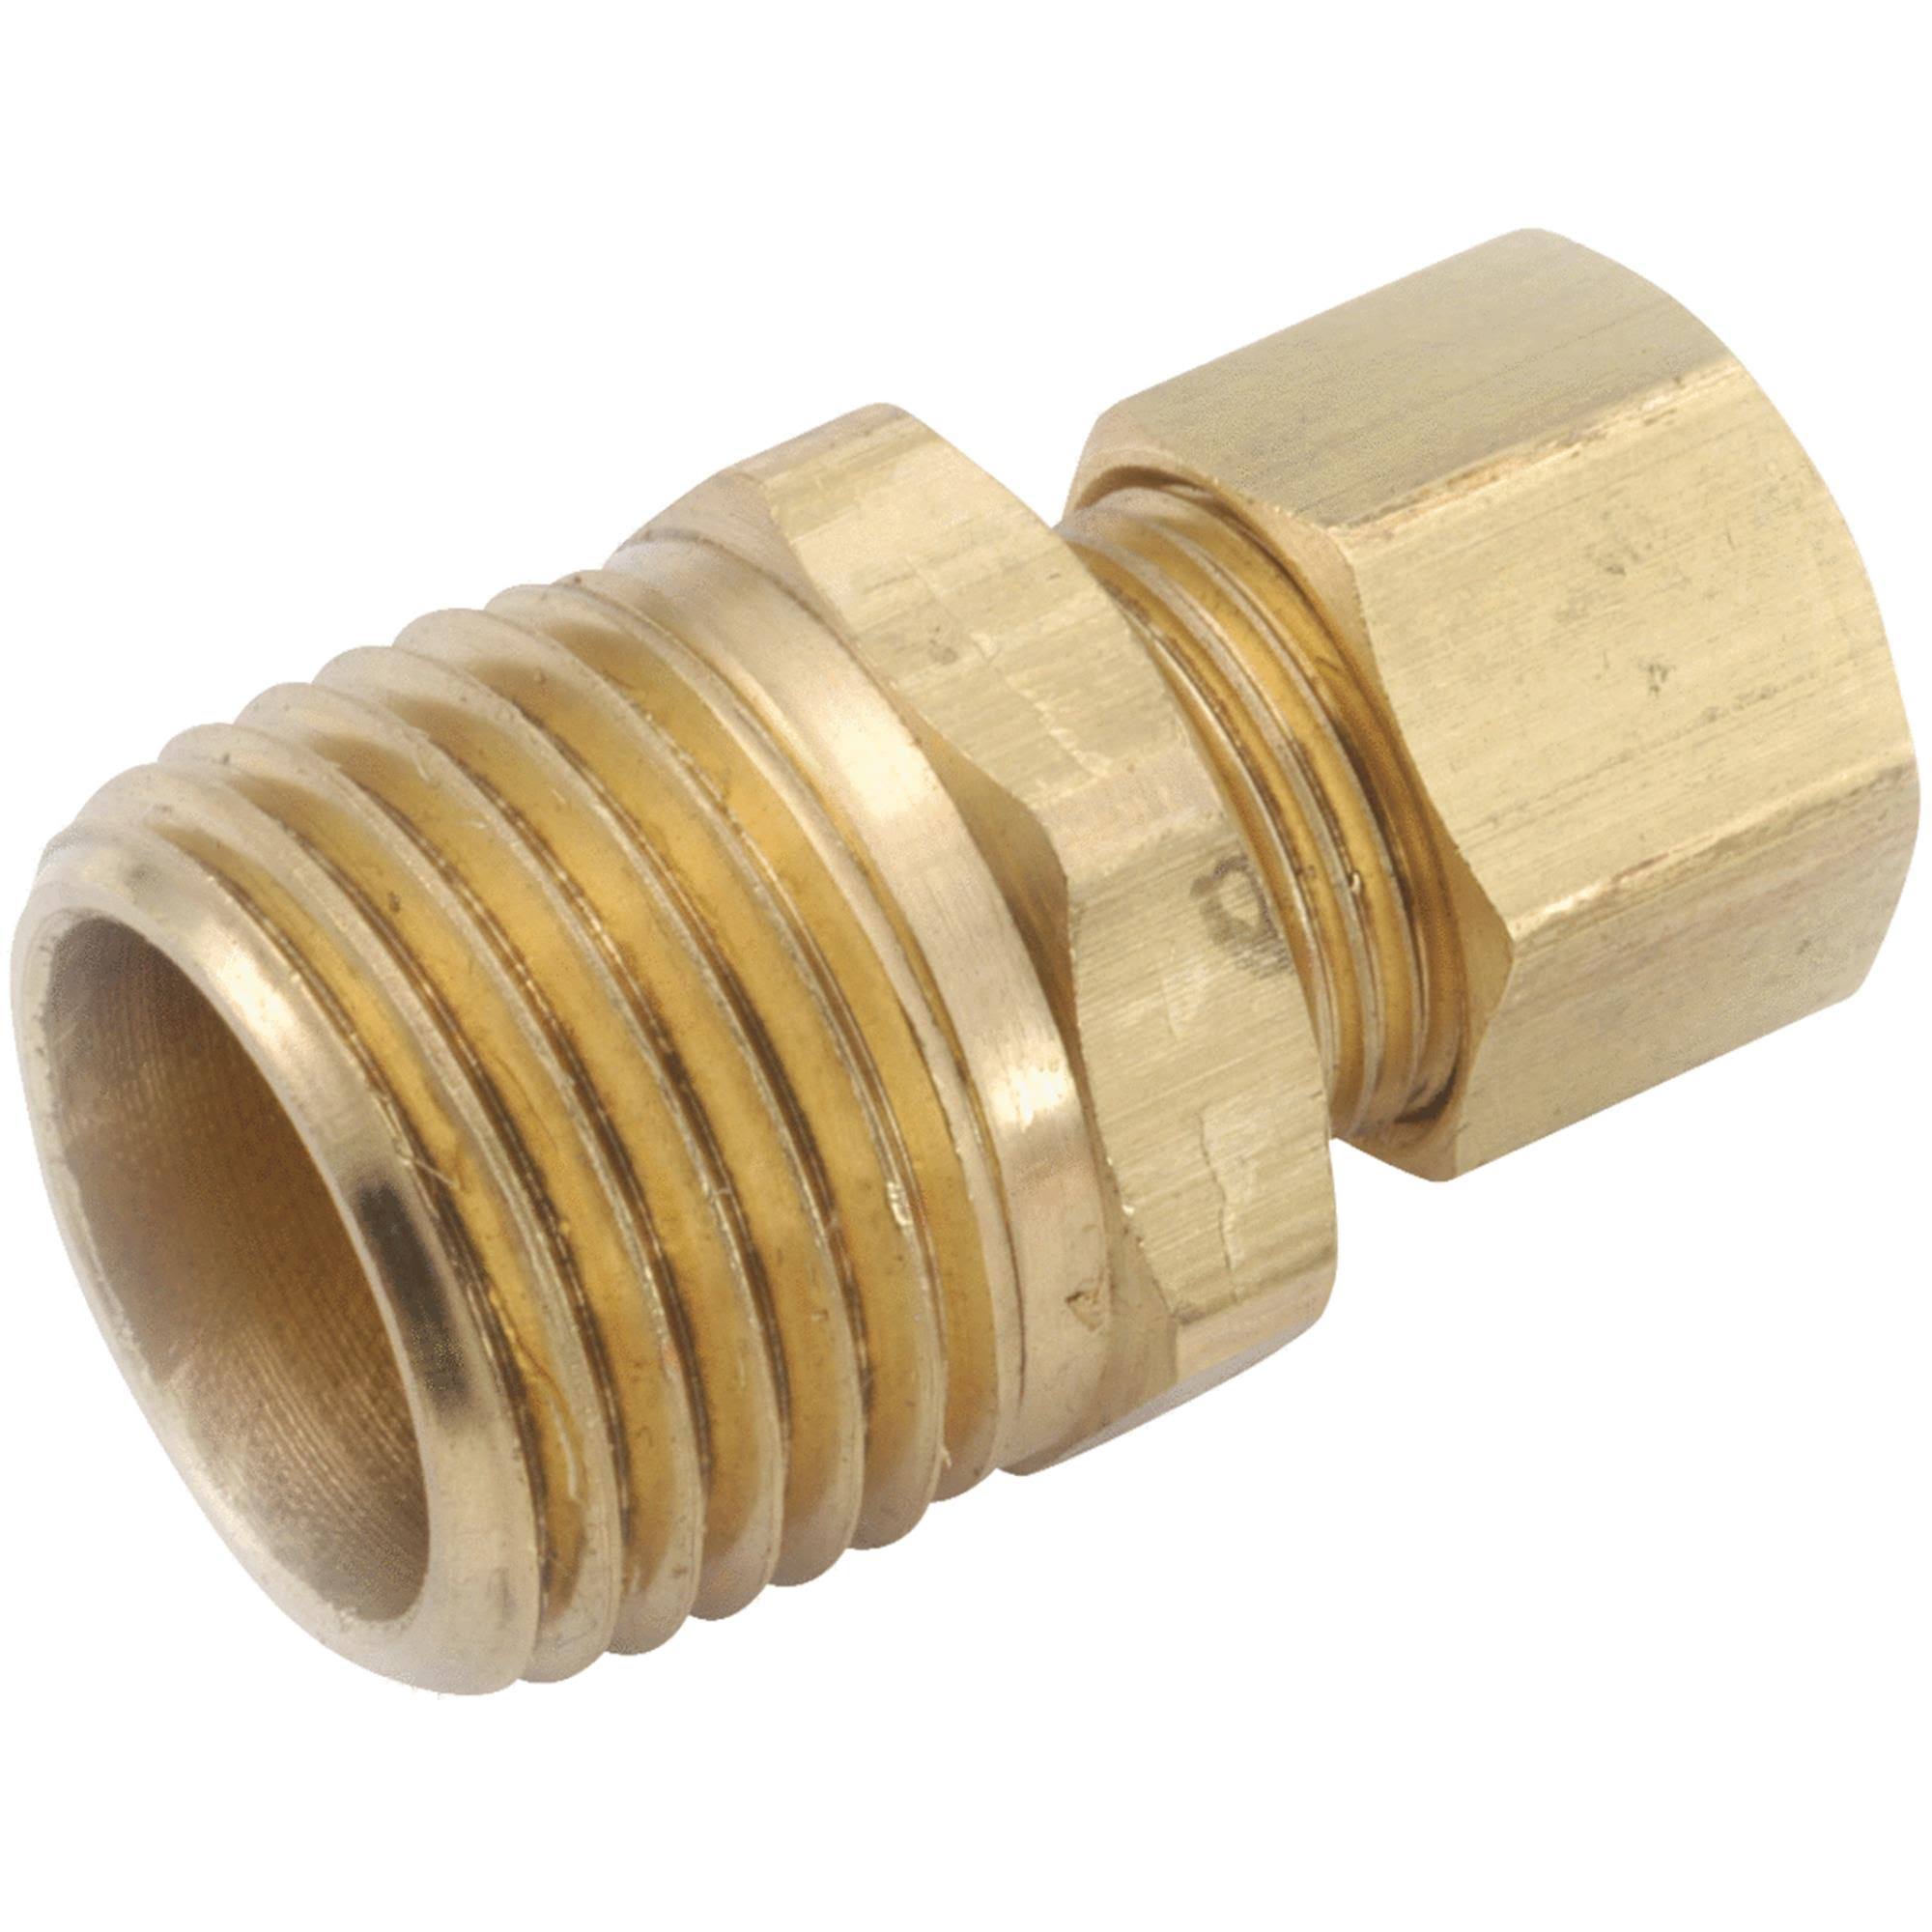 Anderson Metals Low Lead Compression Adapter - Brass, 5/16" x 1/8"